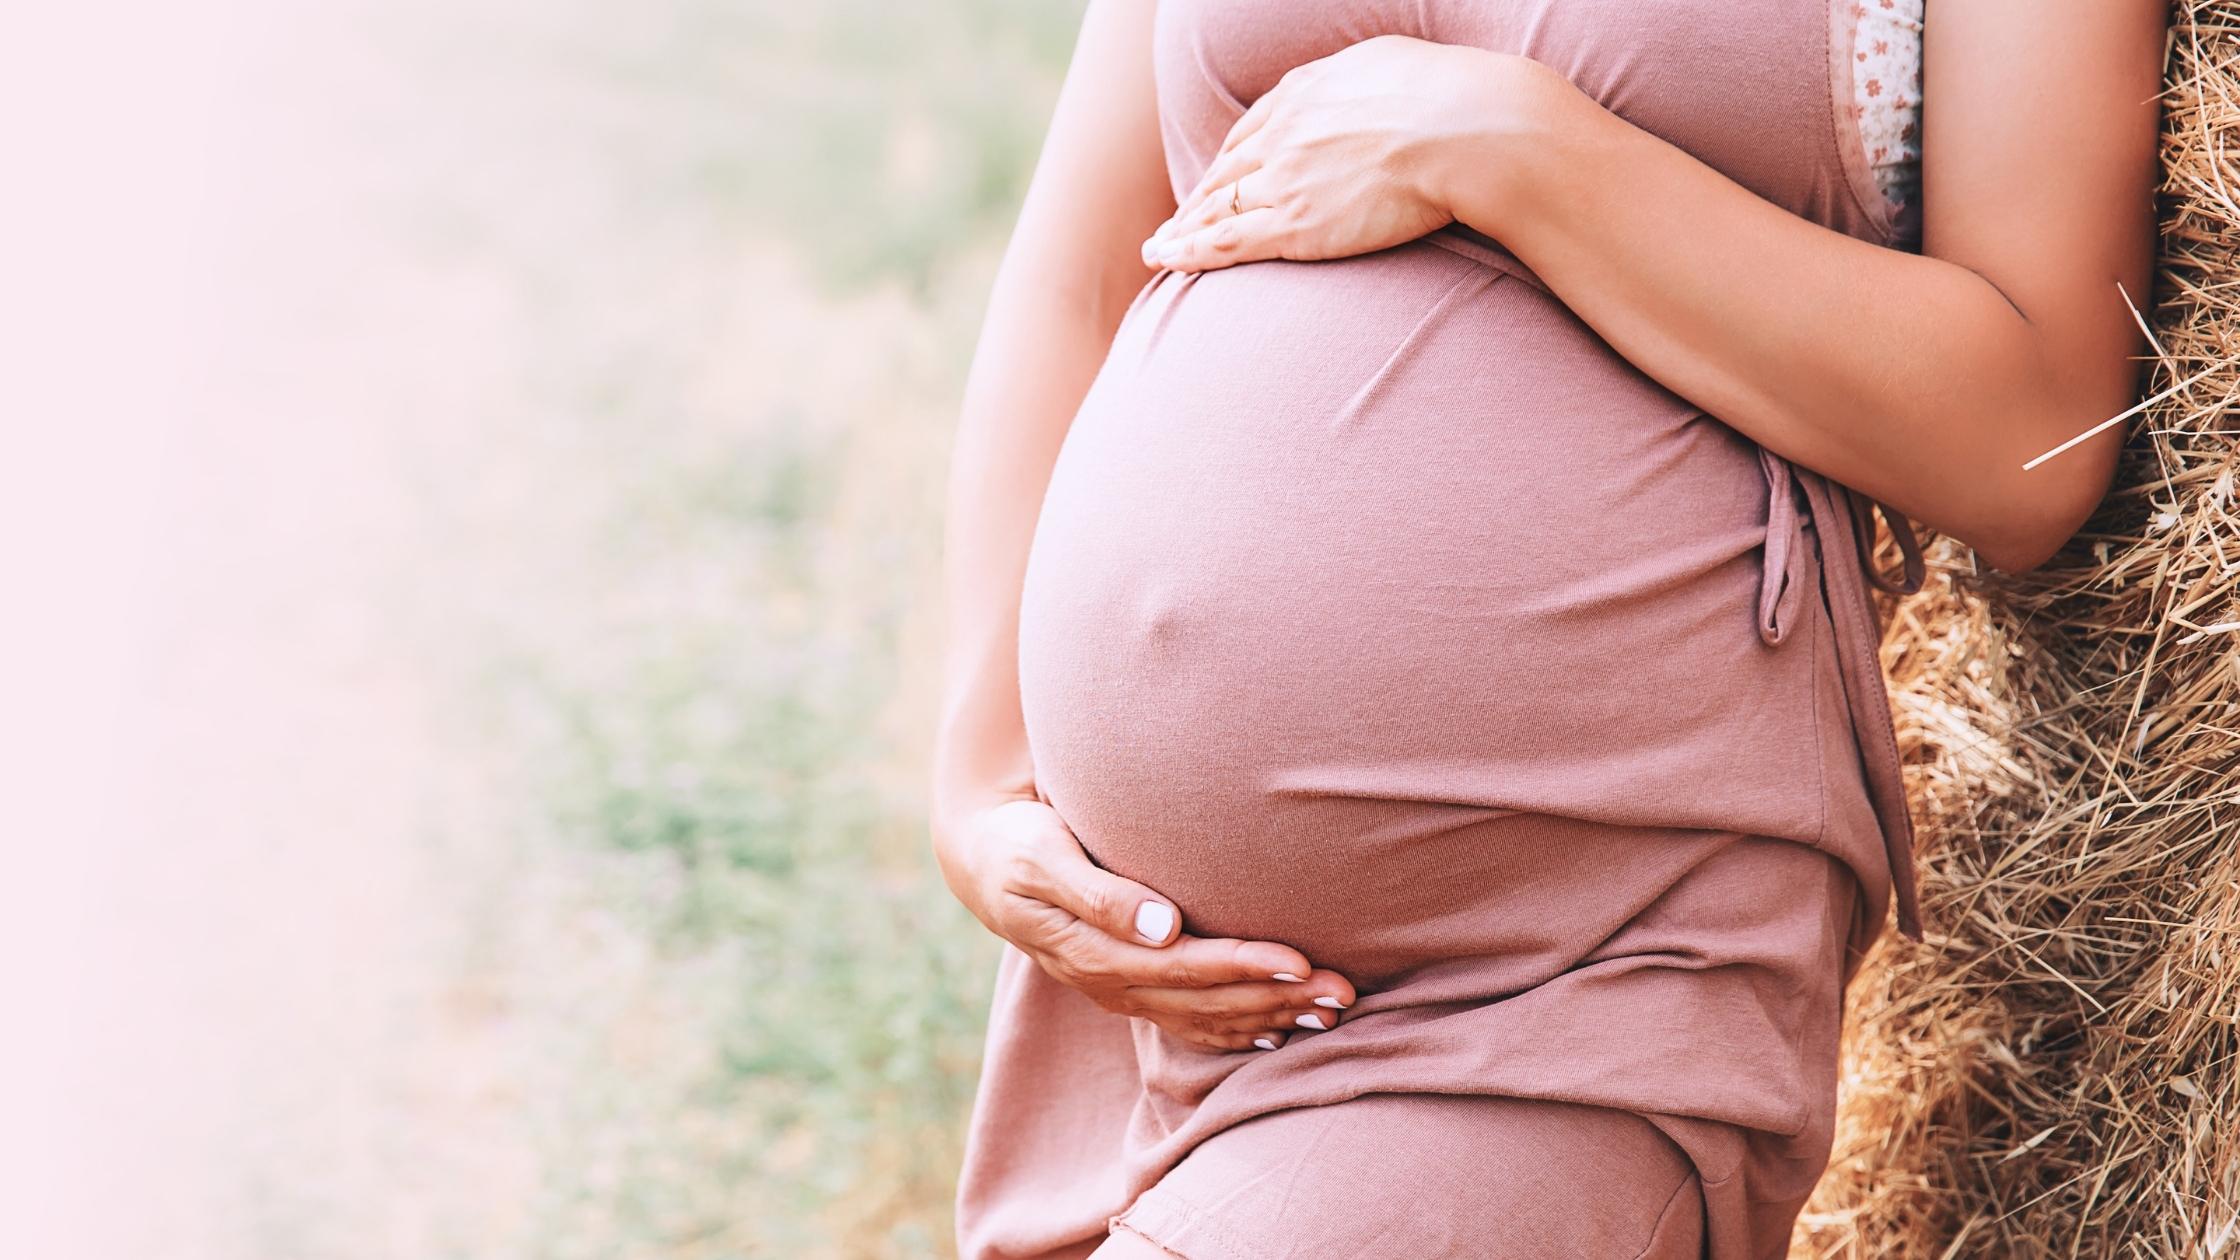 Three Unexpected Things you Should Avoid While Pregnant